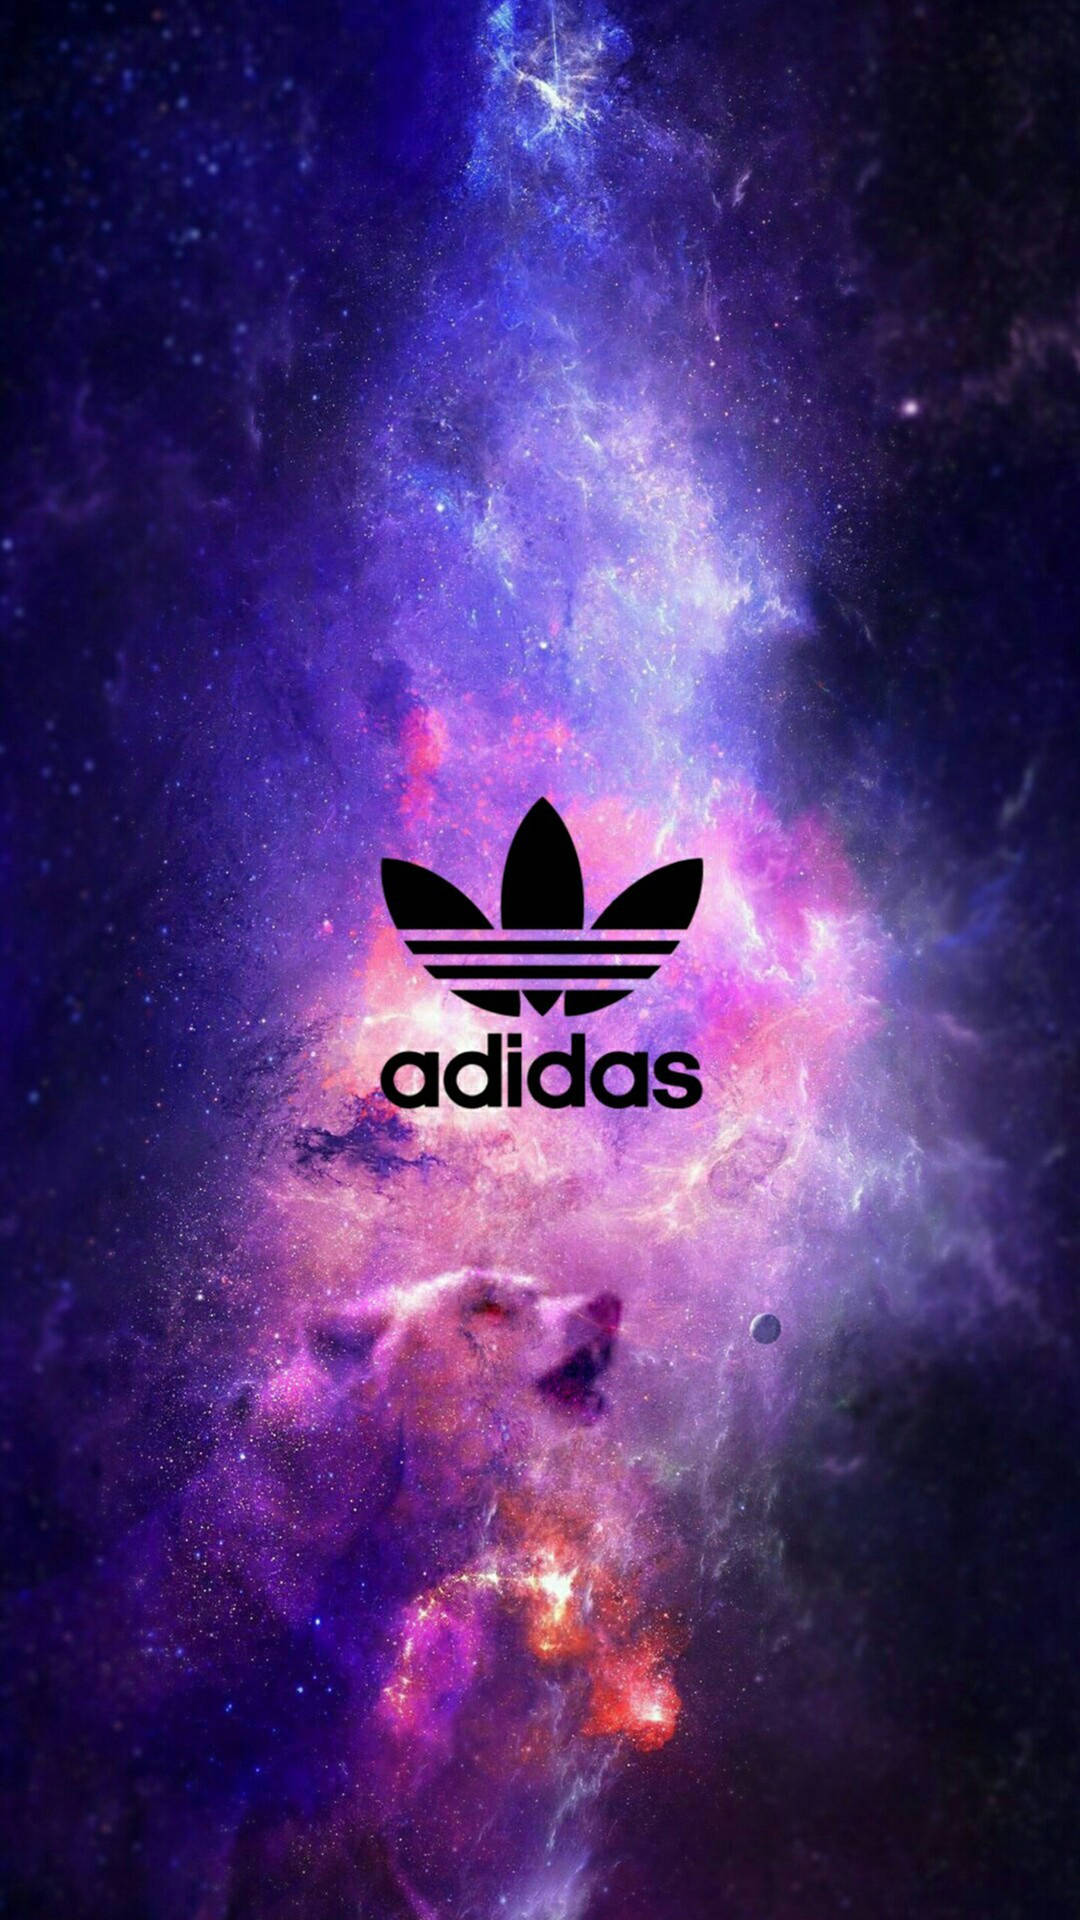 Adidas Galaxy dope iPhone vægtapet Wallpaper